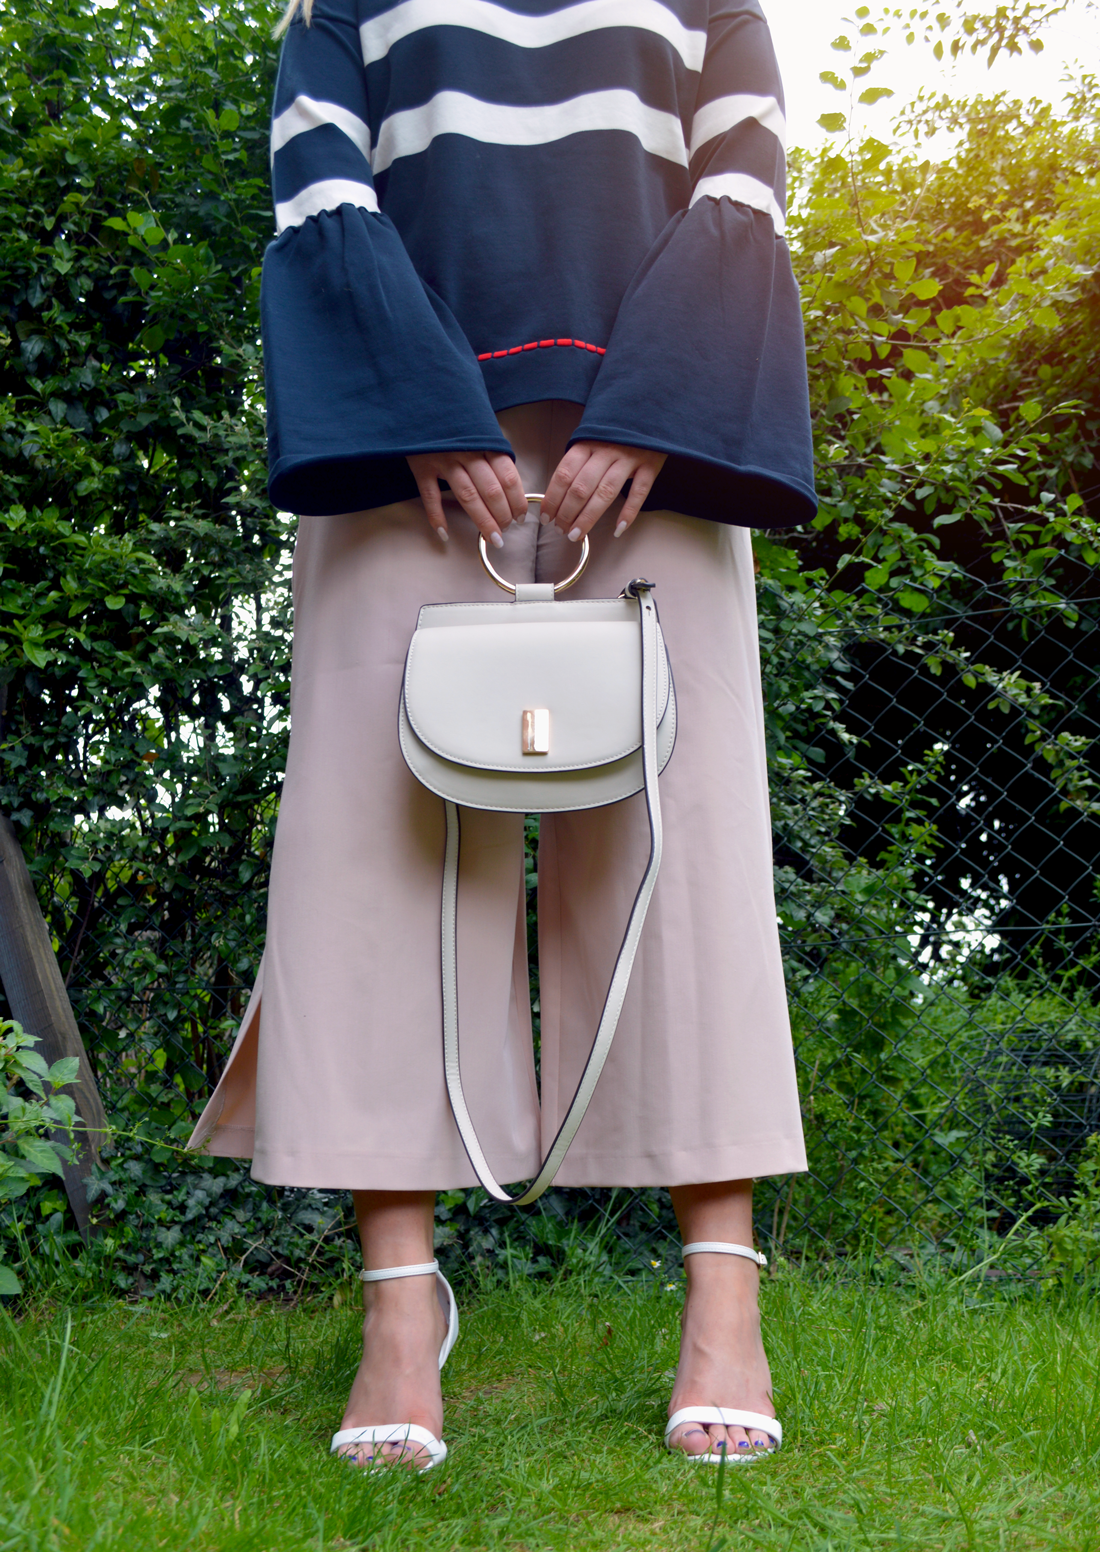 Hannah Gladwin wearing Asos nude culottes with side splits, with barely there white heeled sandals, with an over-sized navy knitted jumper with large sleeves, holding a cream Mango bag by its gold ring.